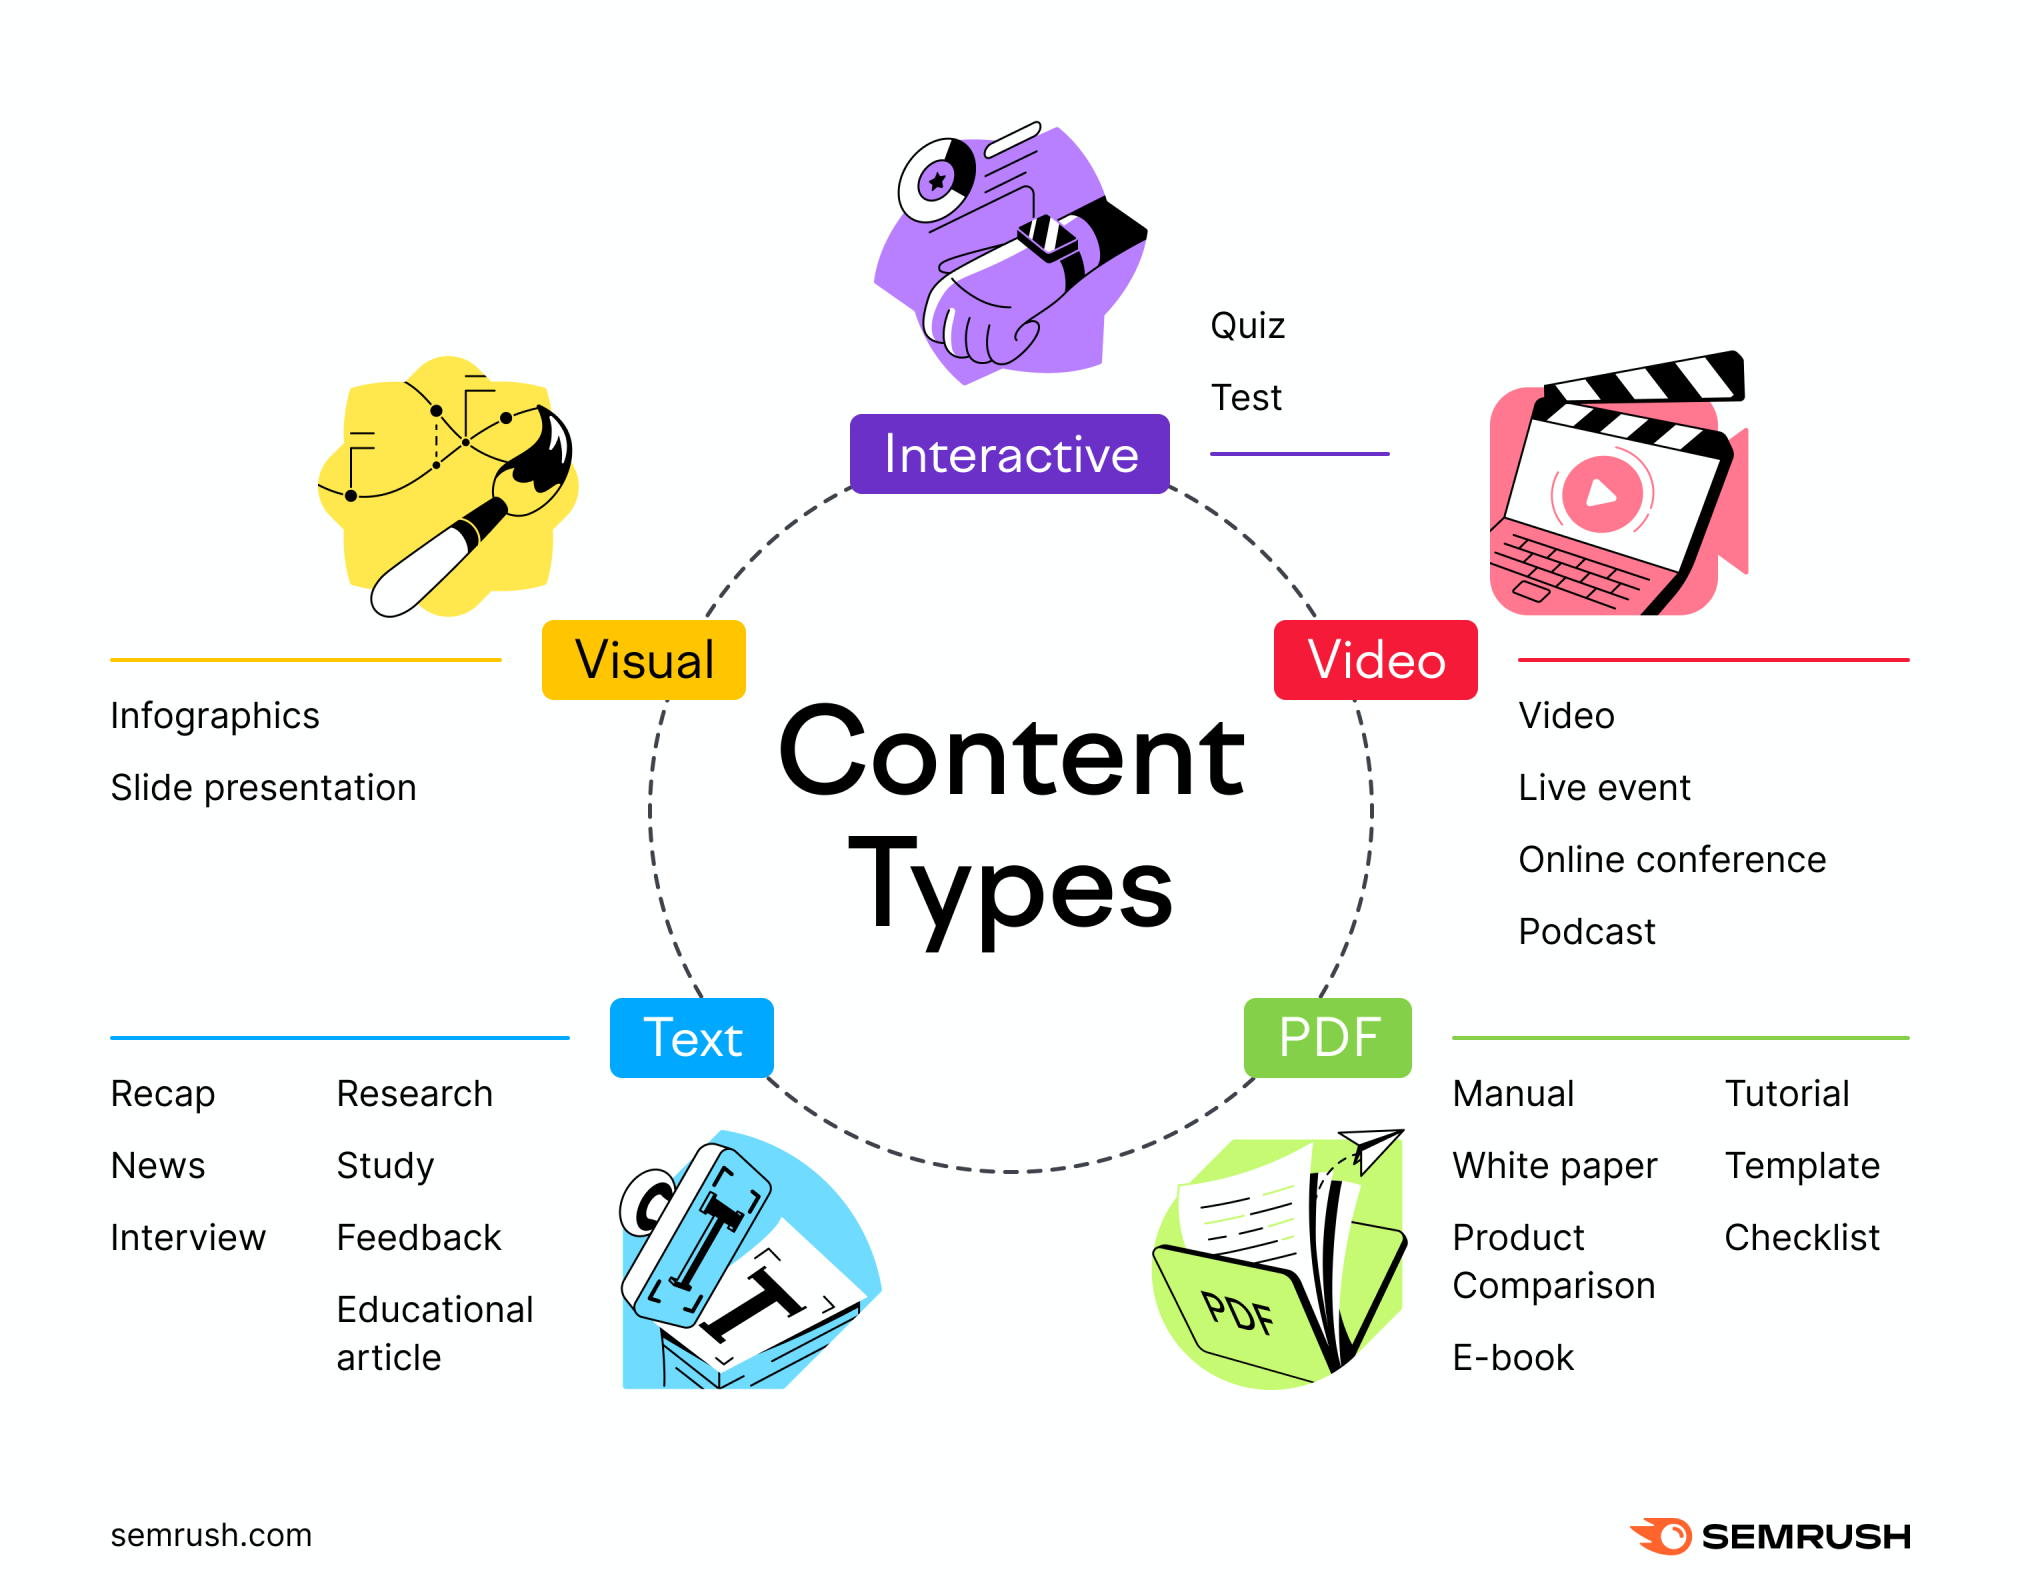 Digital Content Creation: What It Is and How to Excel at It